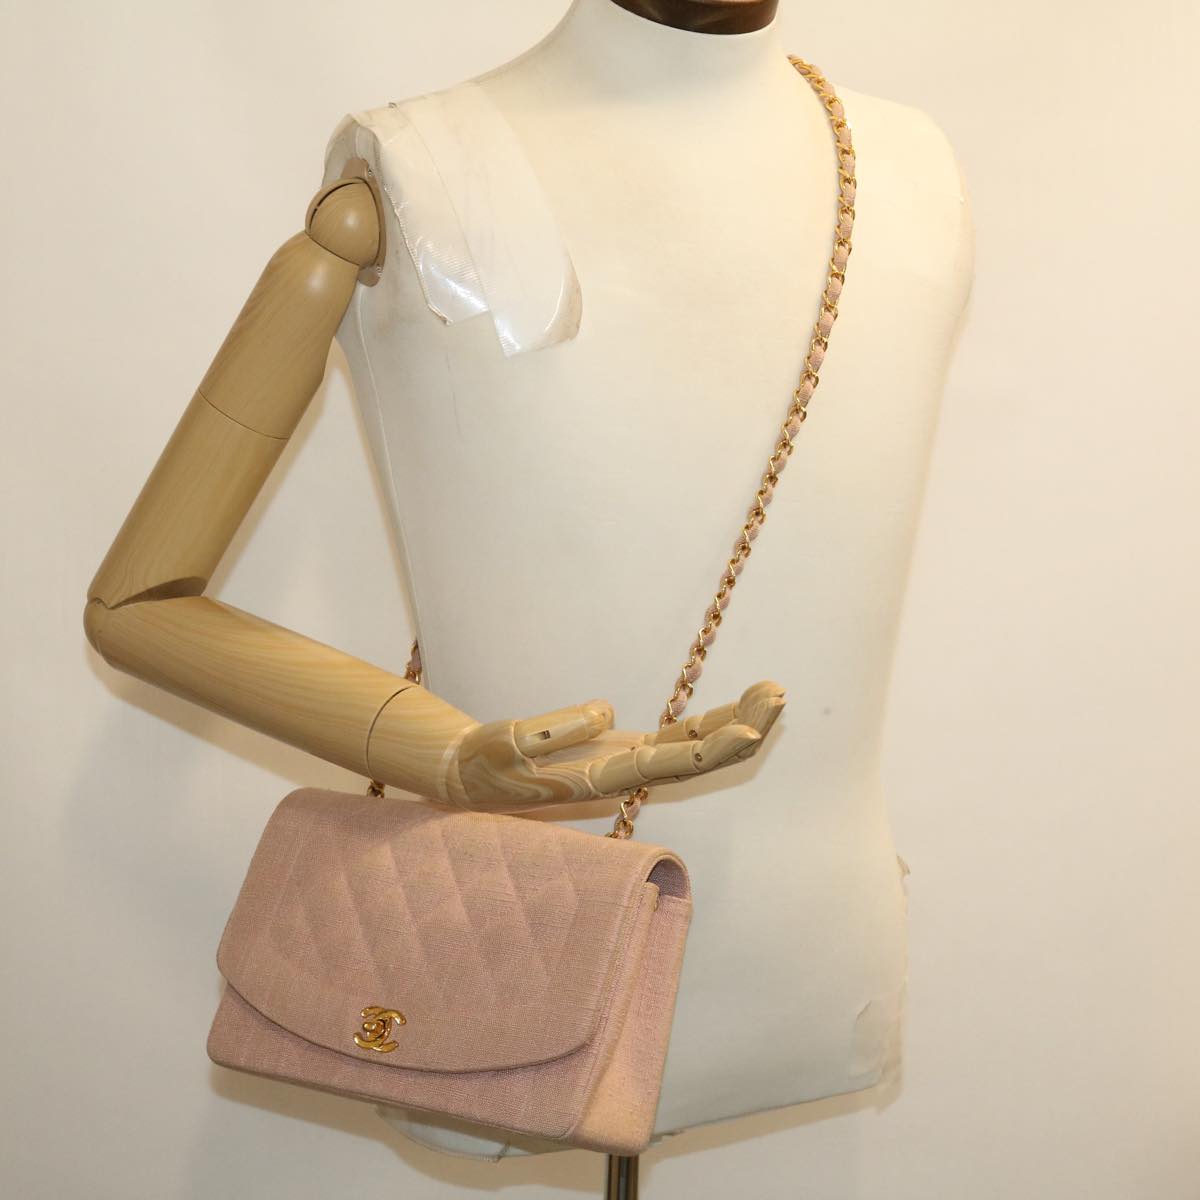 CHANEL Matelasse Turn Lock Chain Diana Shoulder Bag Canvas Pink CC Auth 29889A